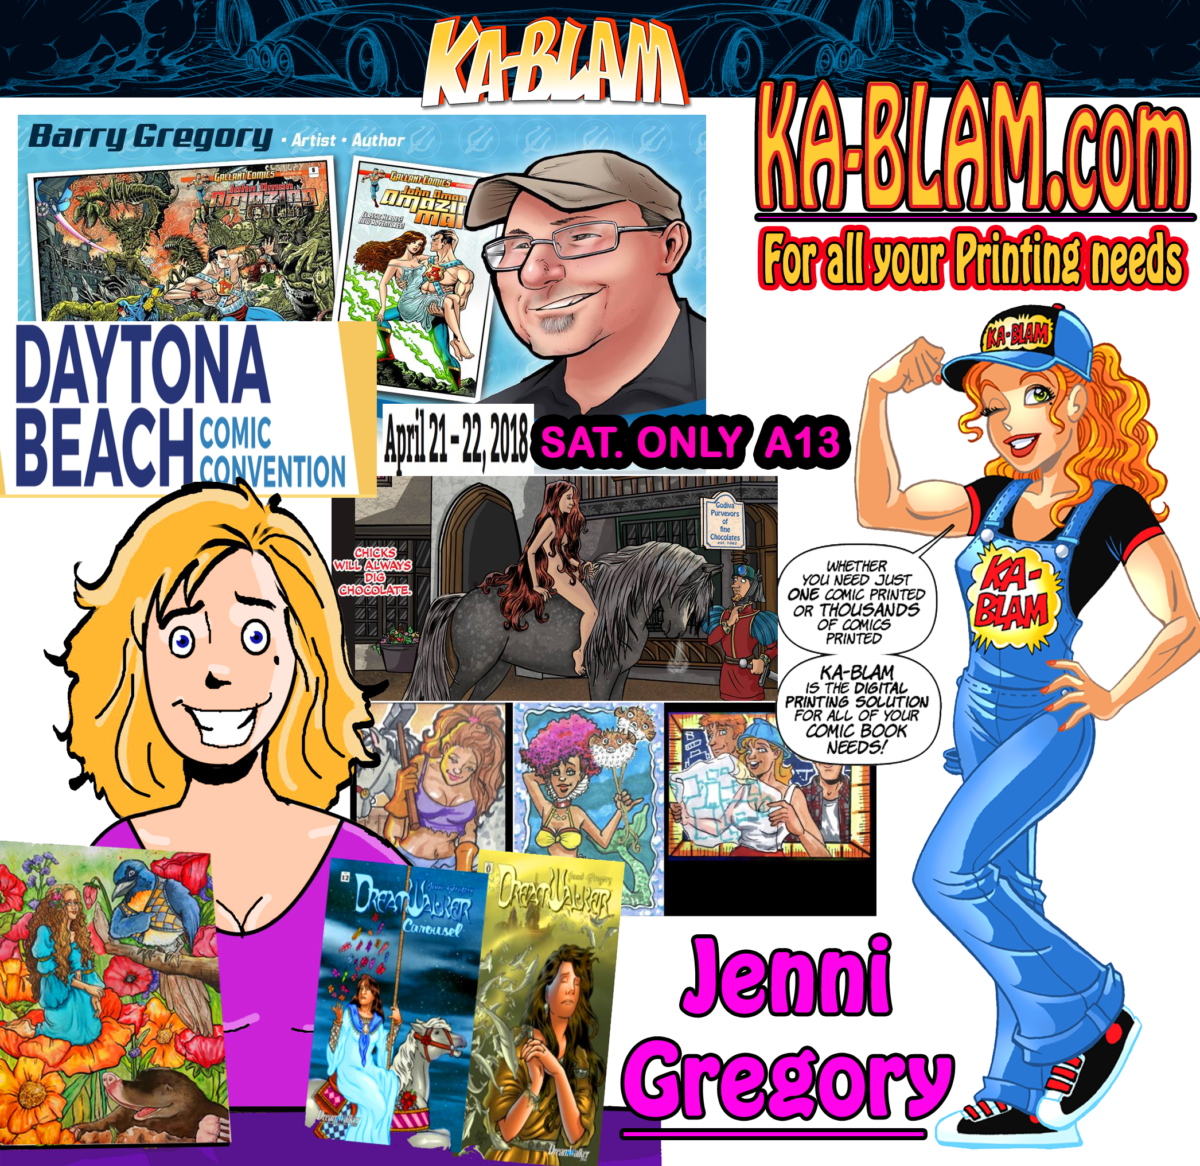 COMIC CON HIGHWAY FLORIDA EXIT::  Jenni and Barry Gregory are appearing @Daytona Beach Comic Convention April 21st